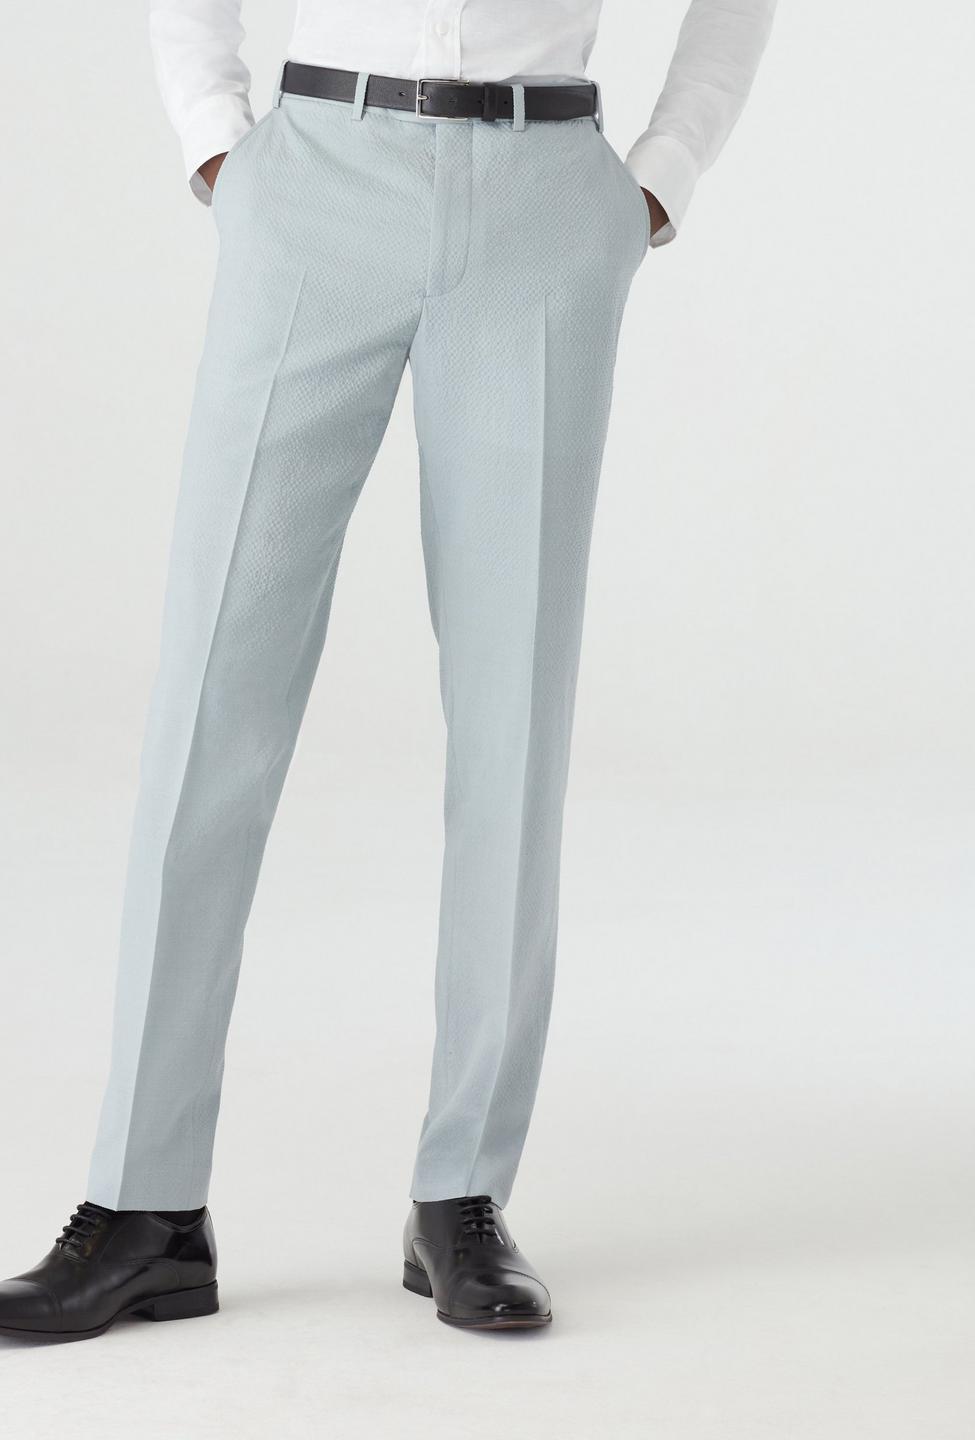 Gray pants - Solid Design from Seasonal Indochino Collection